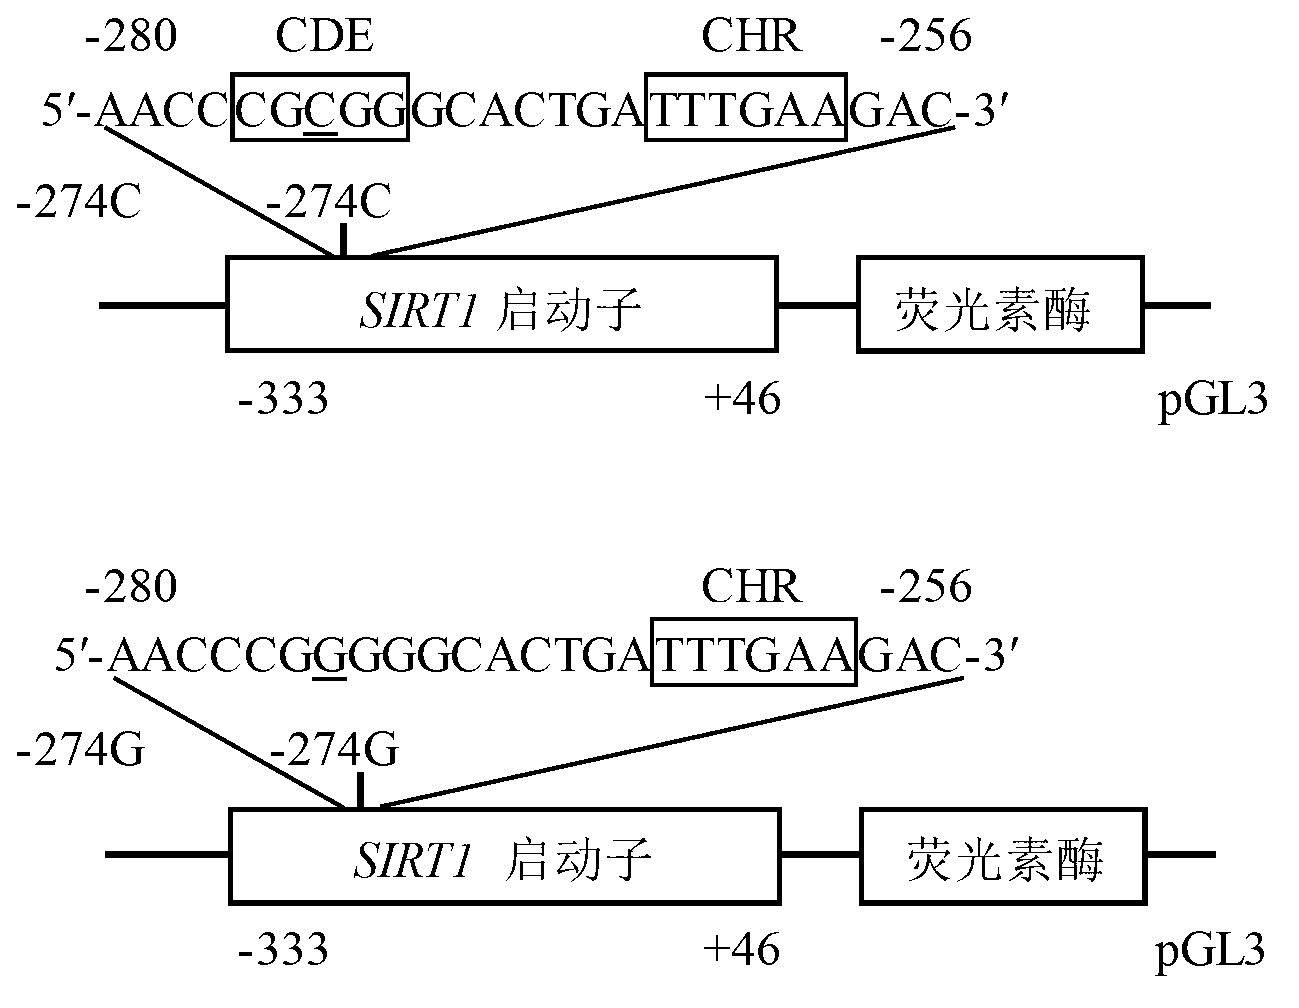 Method for quickly detecting RFLP (restriction fragment length polymorphism) of SNP (single nucleotide polymorphism) of common ox SIRT1 (silent information regulator 1) gene